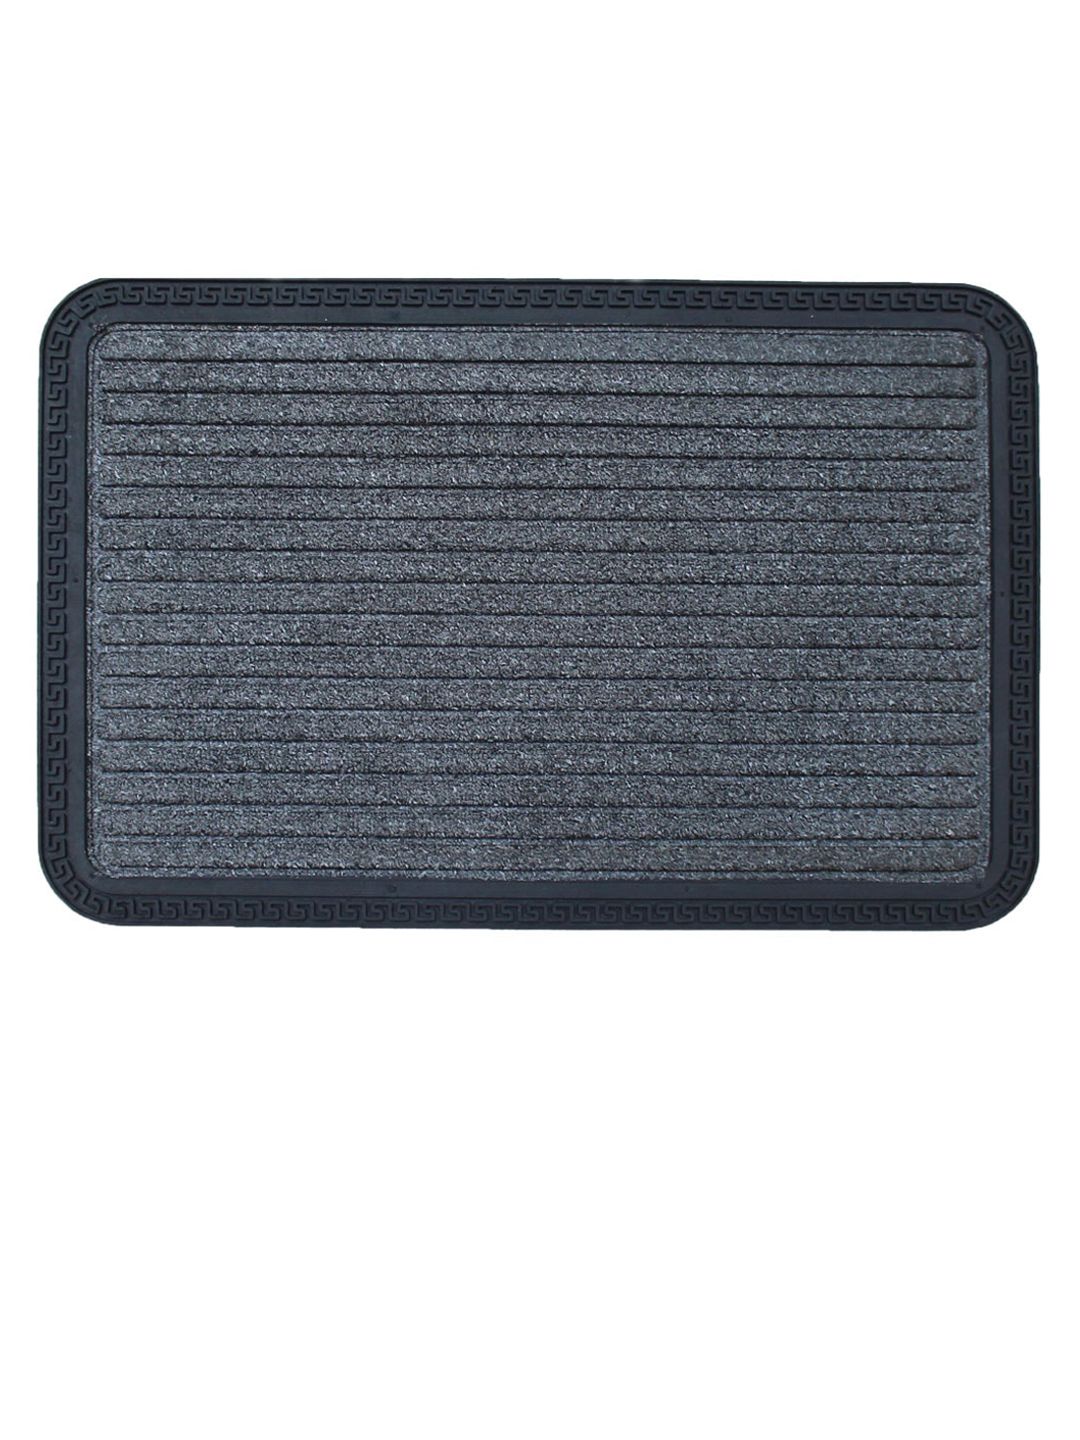 LUXEHOME INTERNATIONAL Grey Solid Anti-Skid Doormats Price in India